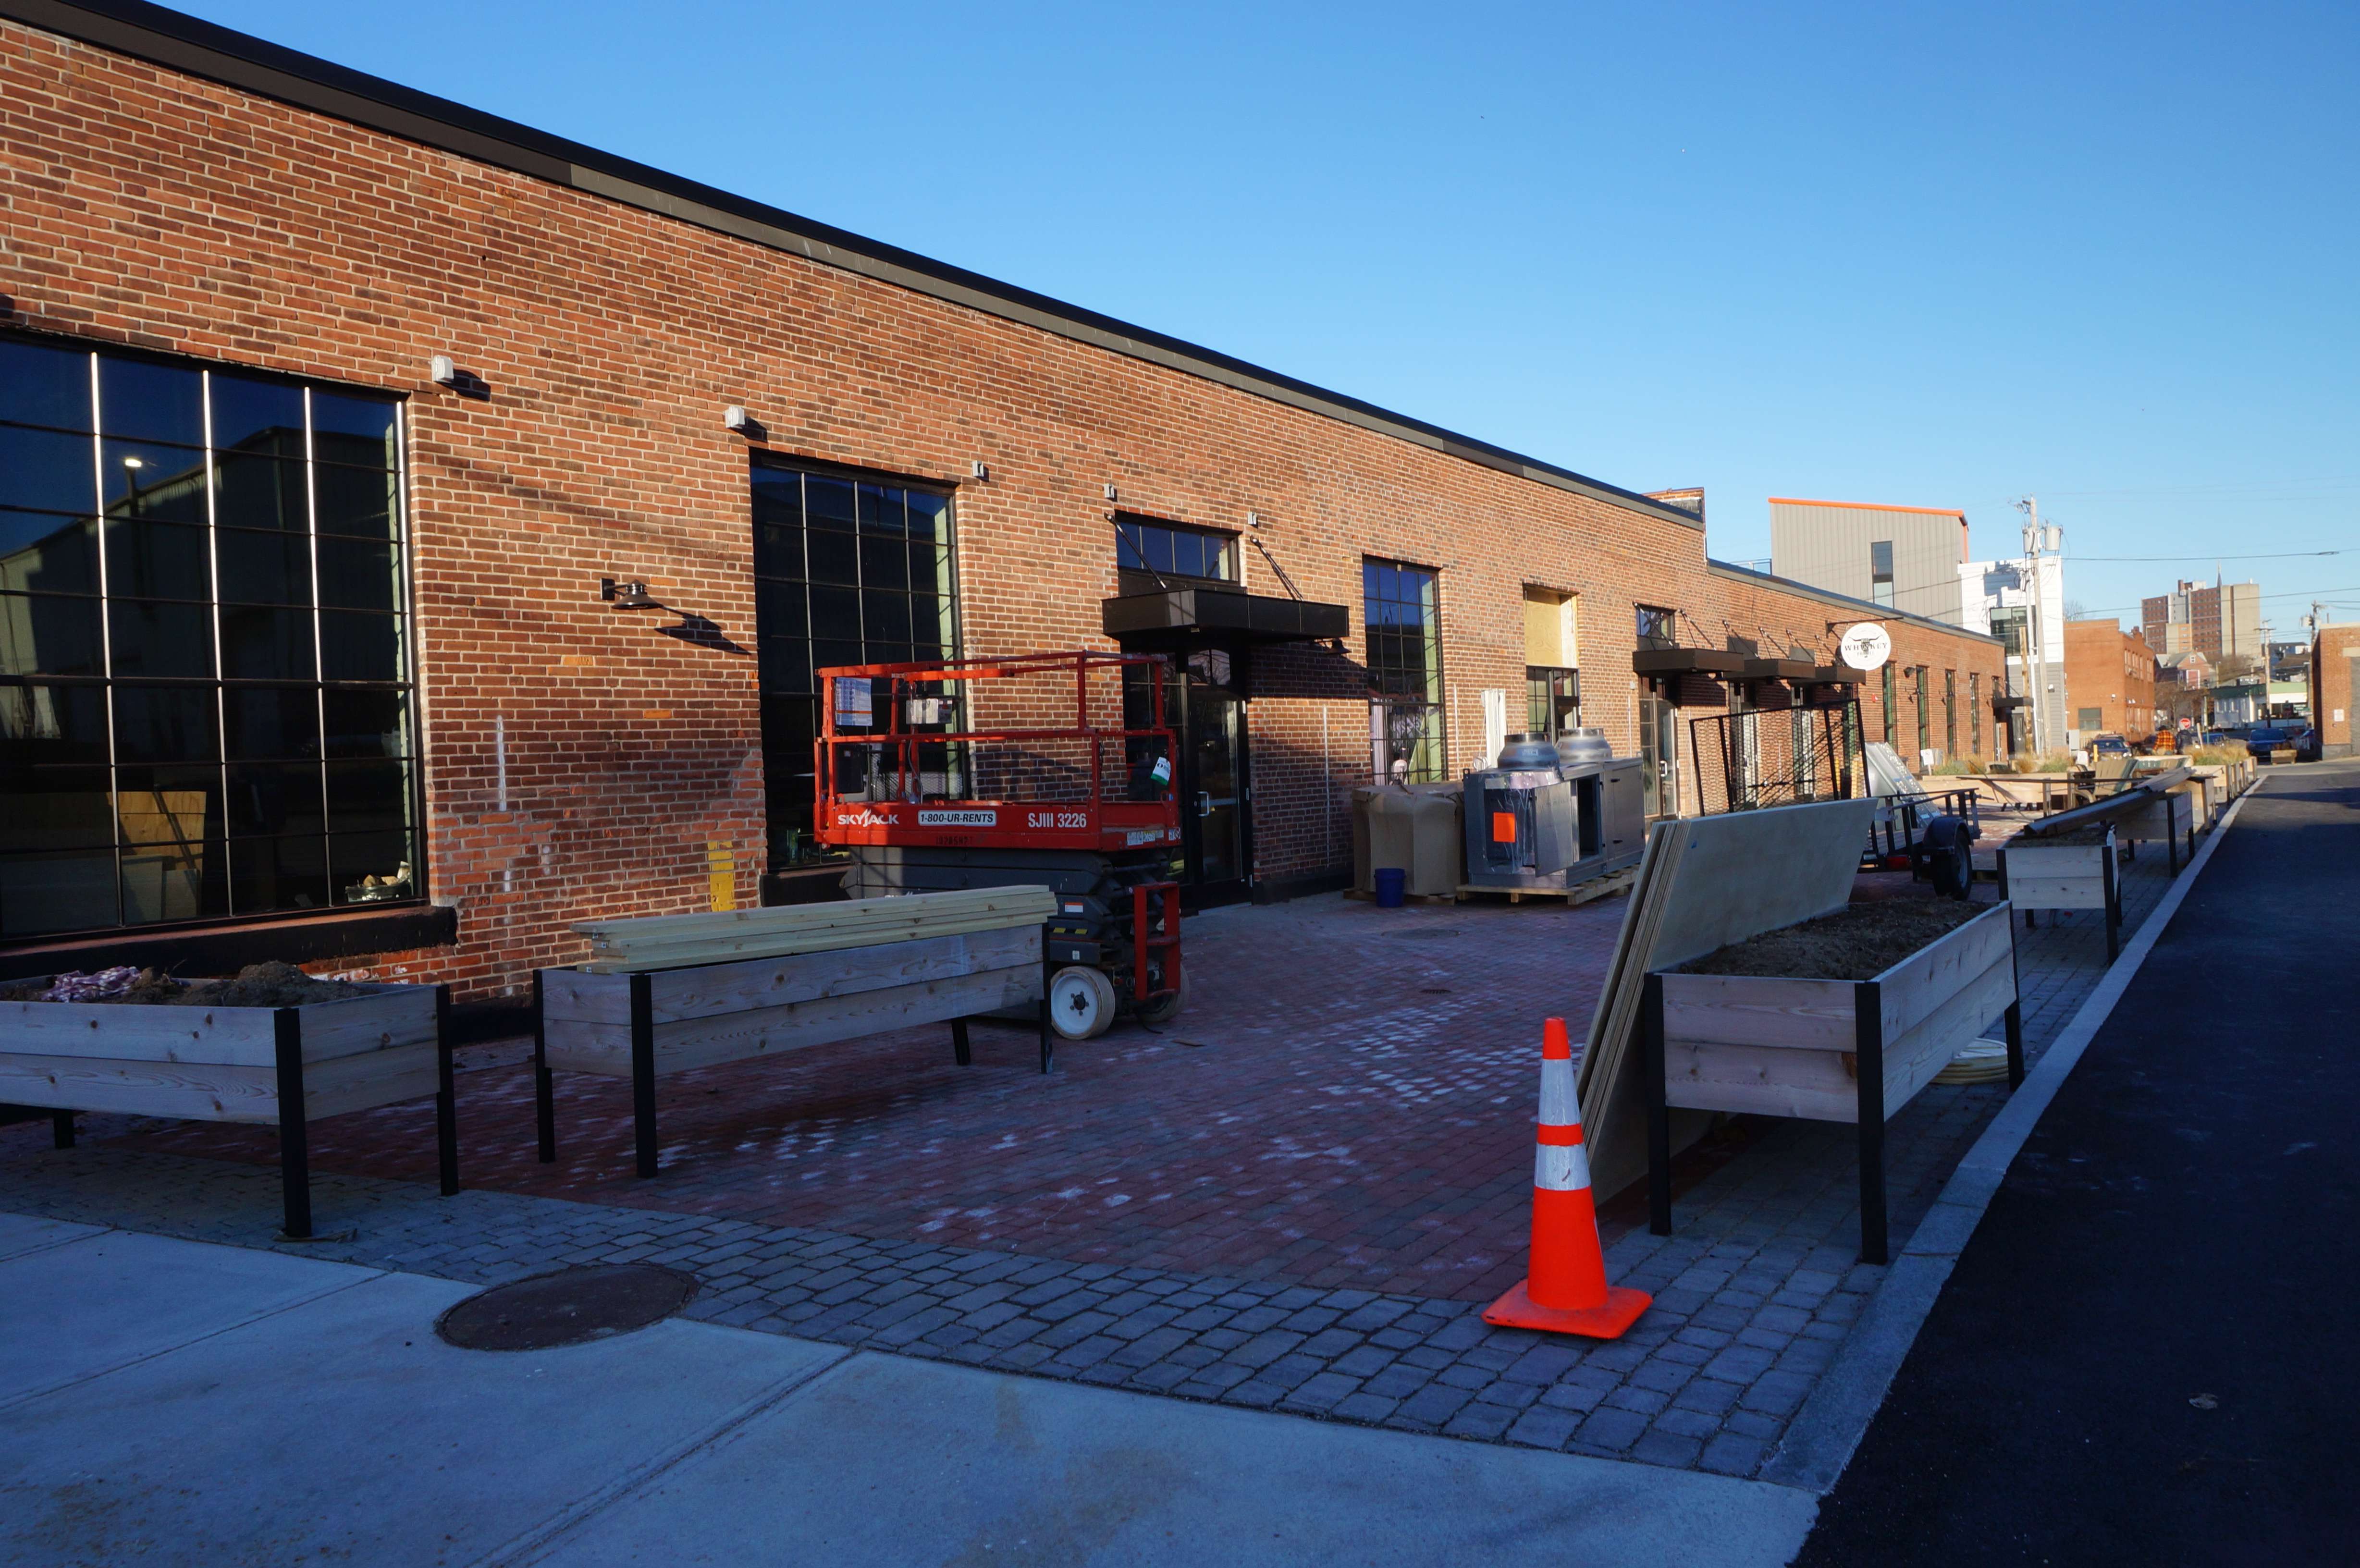 A long brick building with a patio along the front and construction equipment in the foreground.